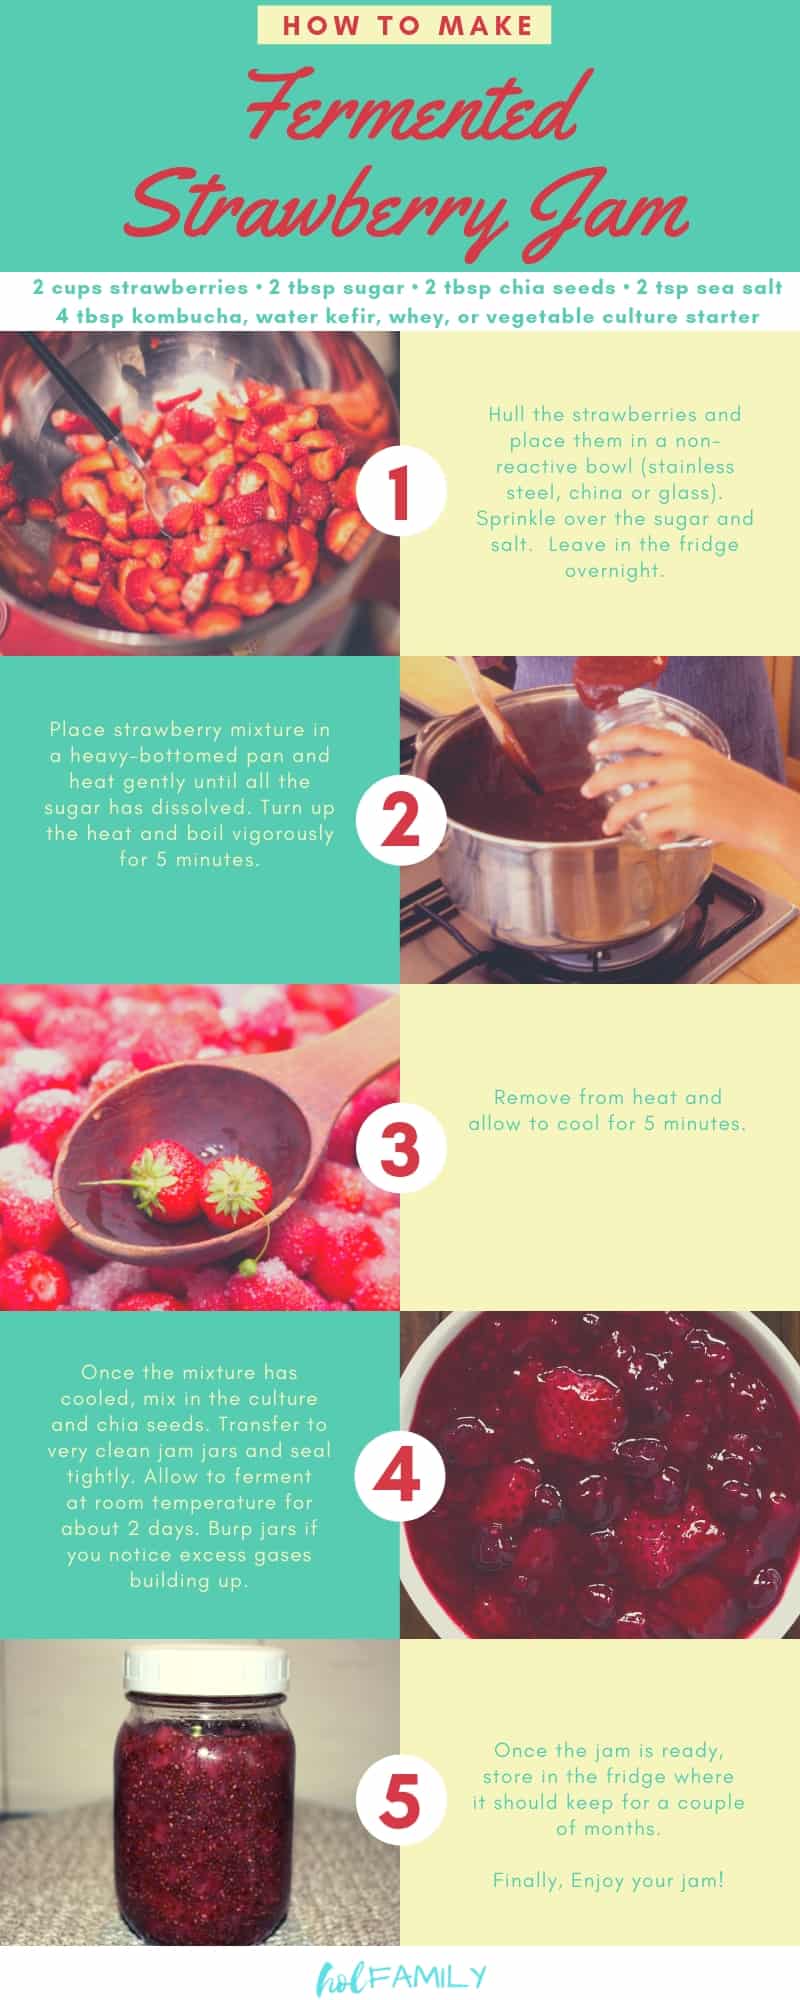 How to make fermented strawberry chia seed jam